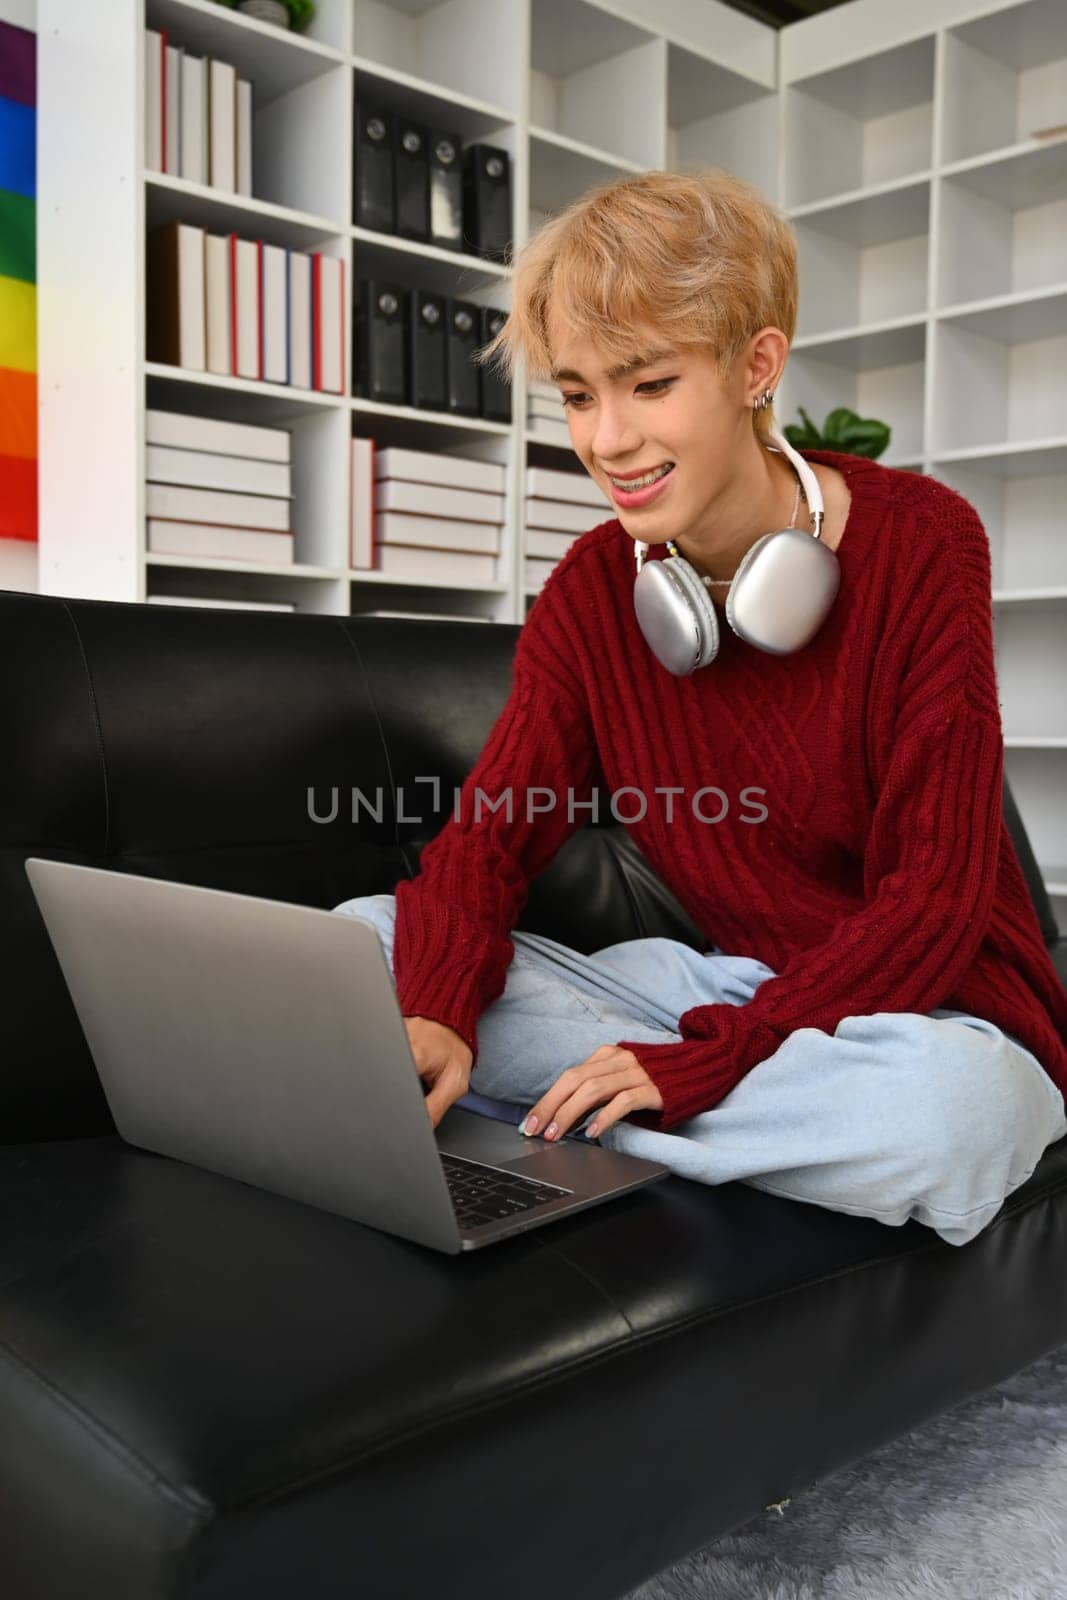 Cheerful asian gay man sitting on couch and using laptop, typing on keyboard, chatting on social media or shopping online.